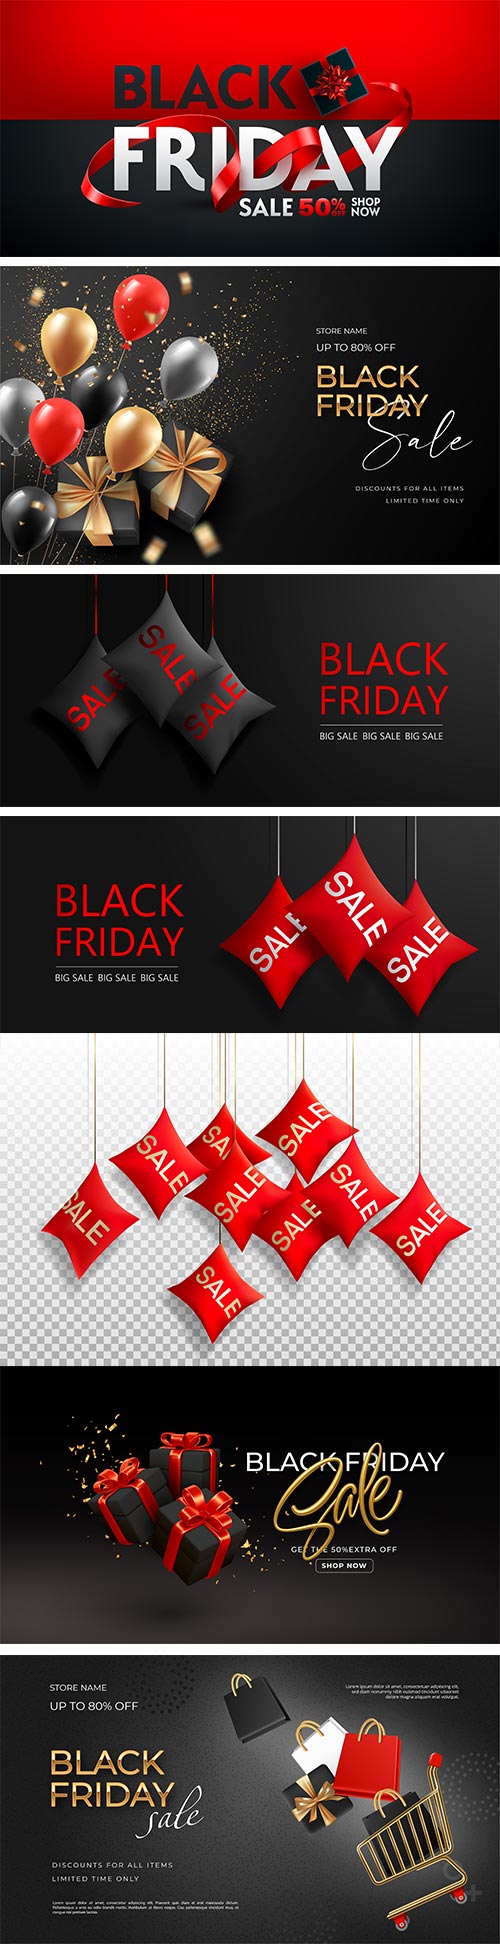 Black friday sale banner background with realistic 3d objects